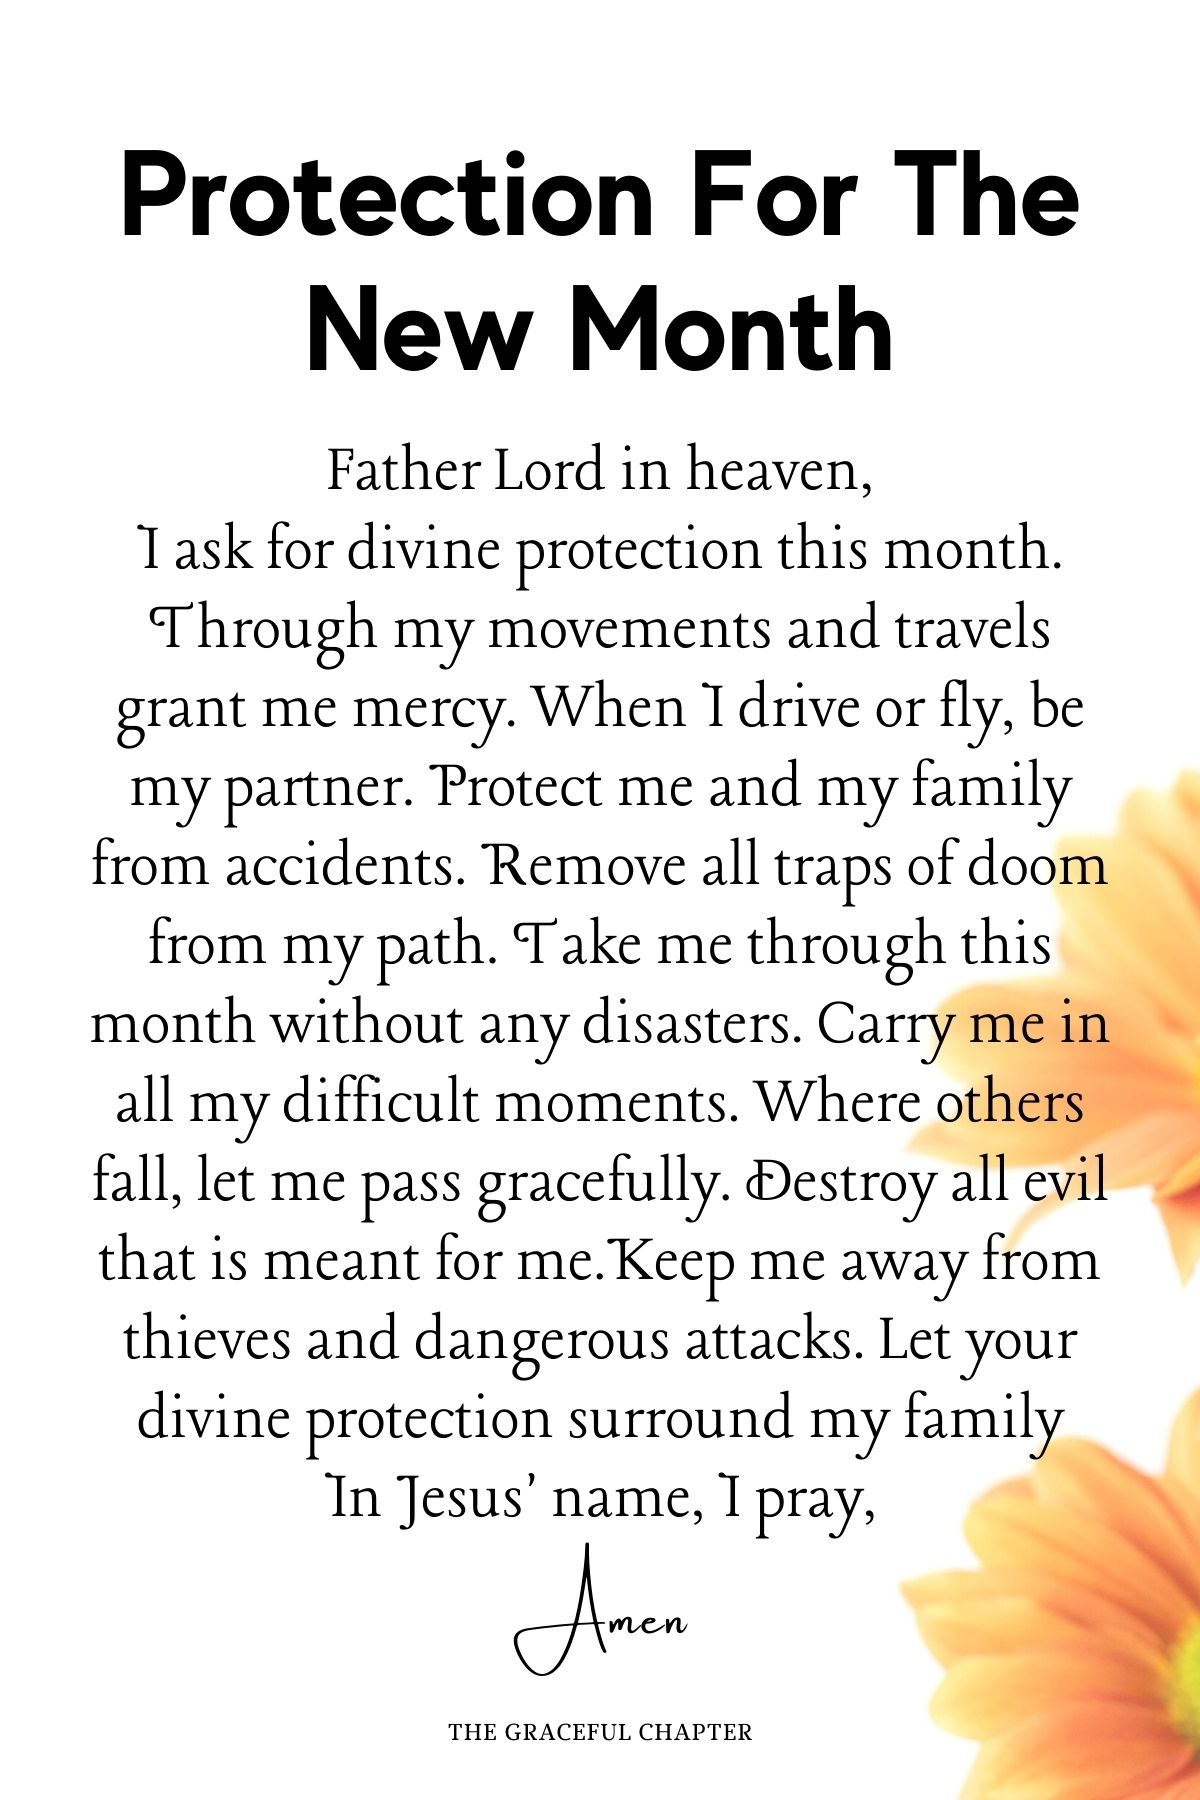 Prayer for protection for the new month